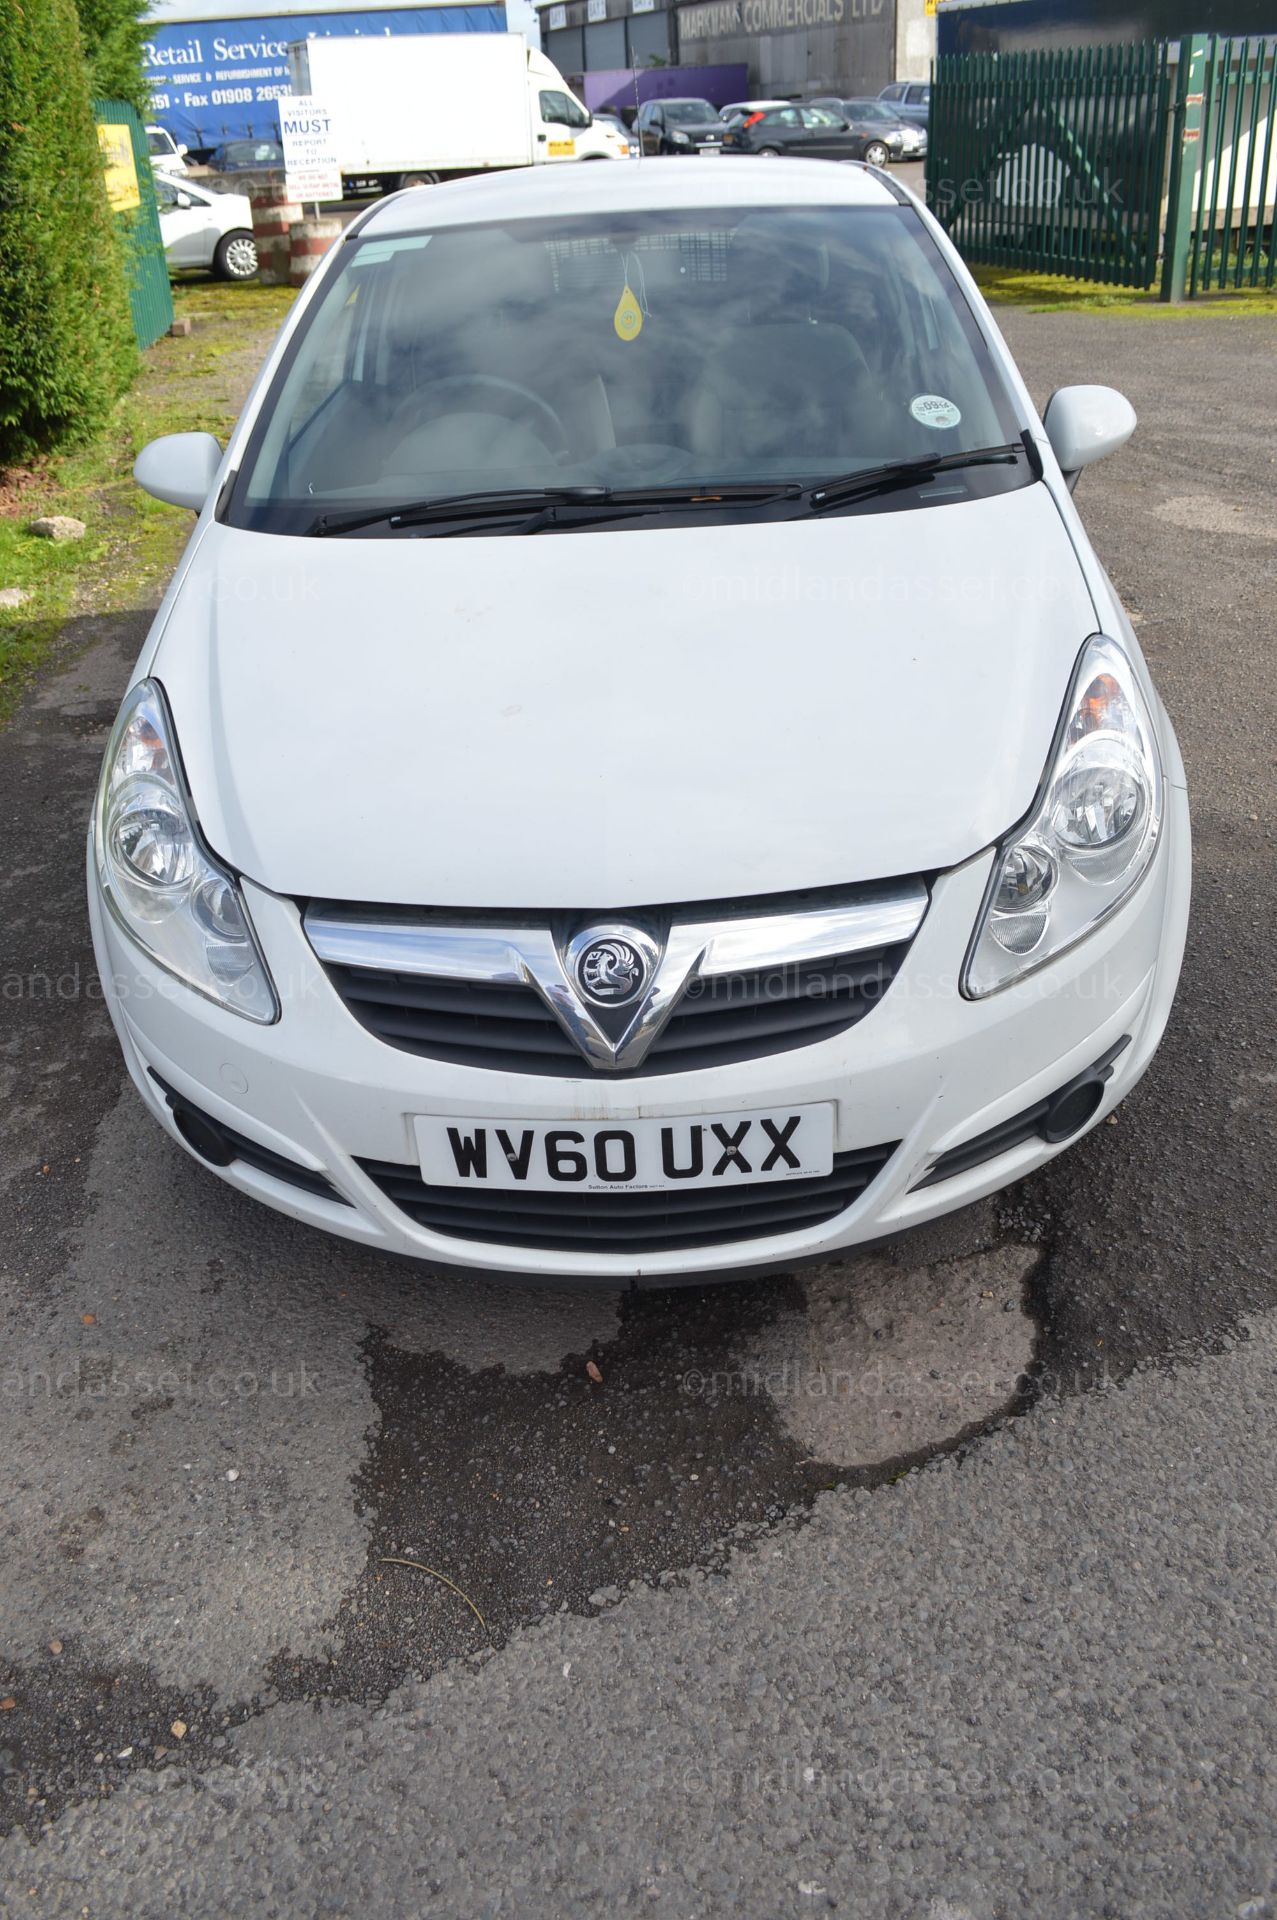 2010/60 REG VAUXHALL CORSA CDTI, SHOWING 1 OWNER, EX BT, FULL SERVICE HISTORY & LOW MILES! *NO VAT* - Image 2 of 14